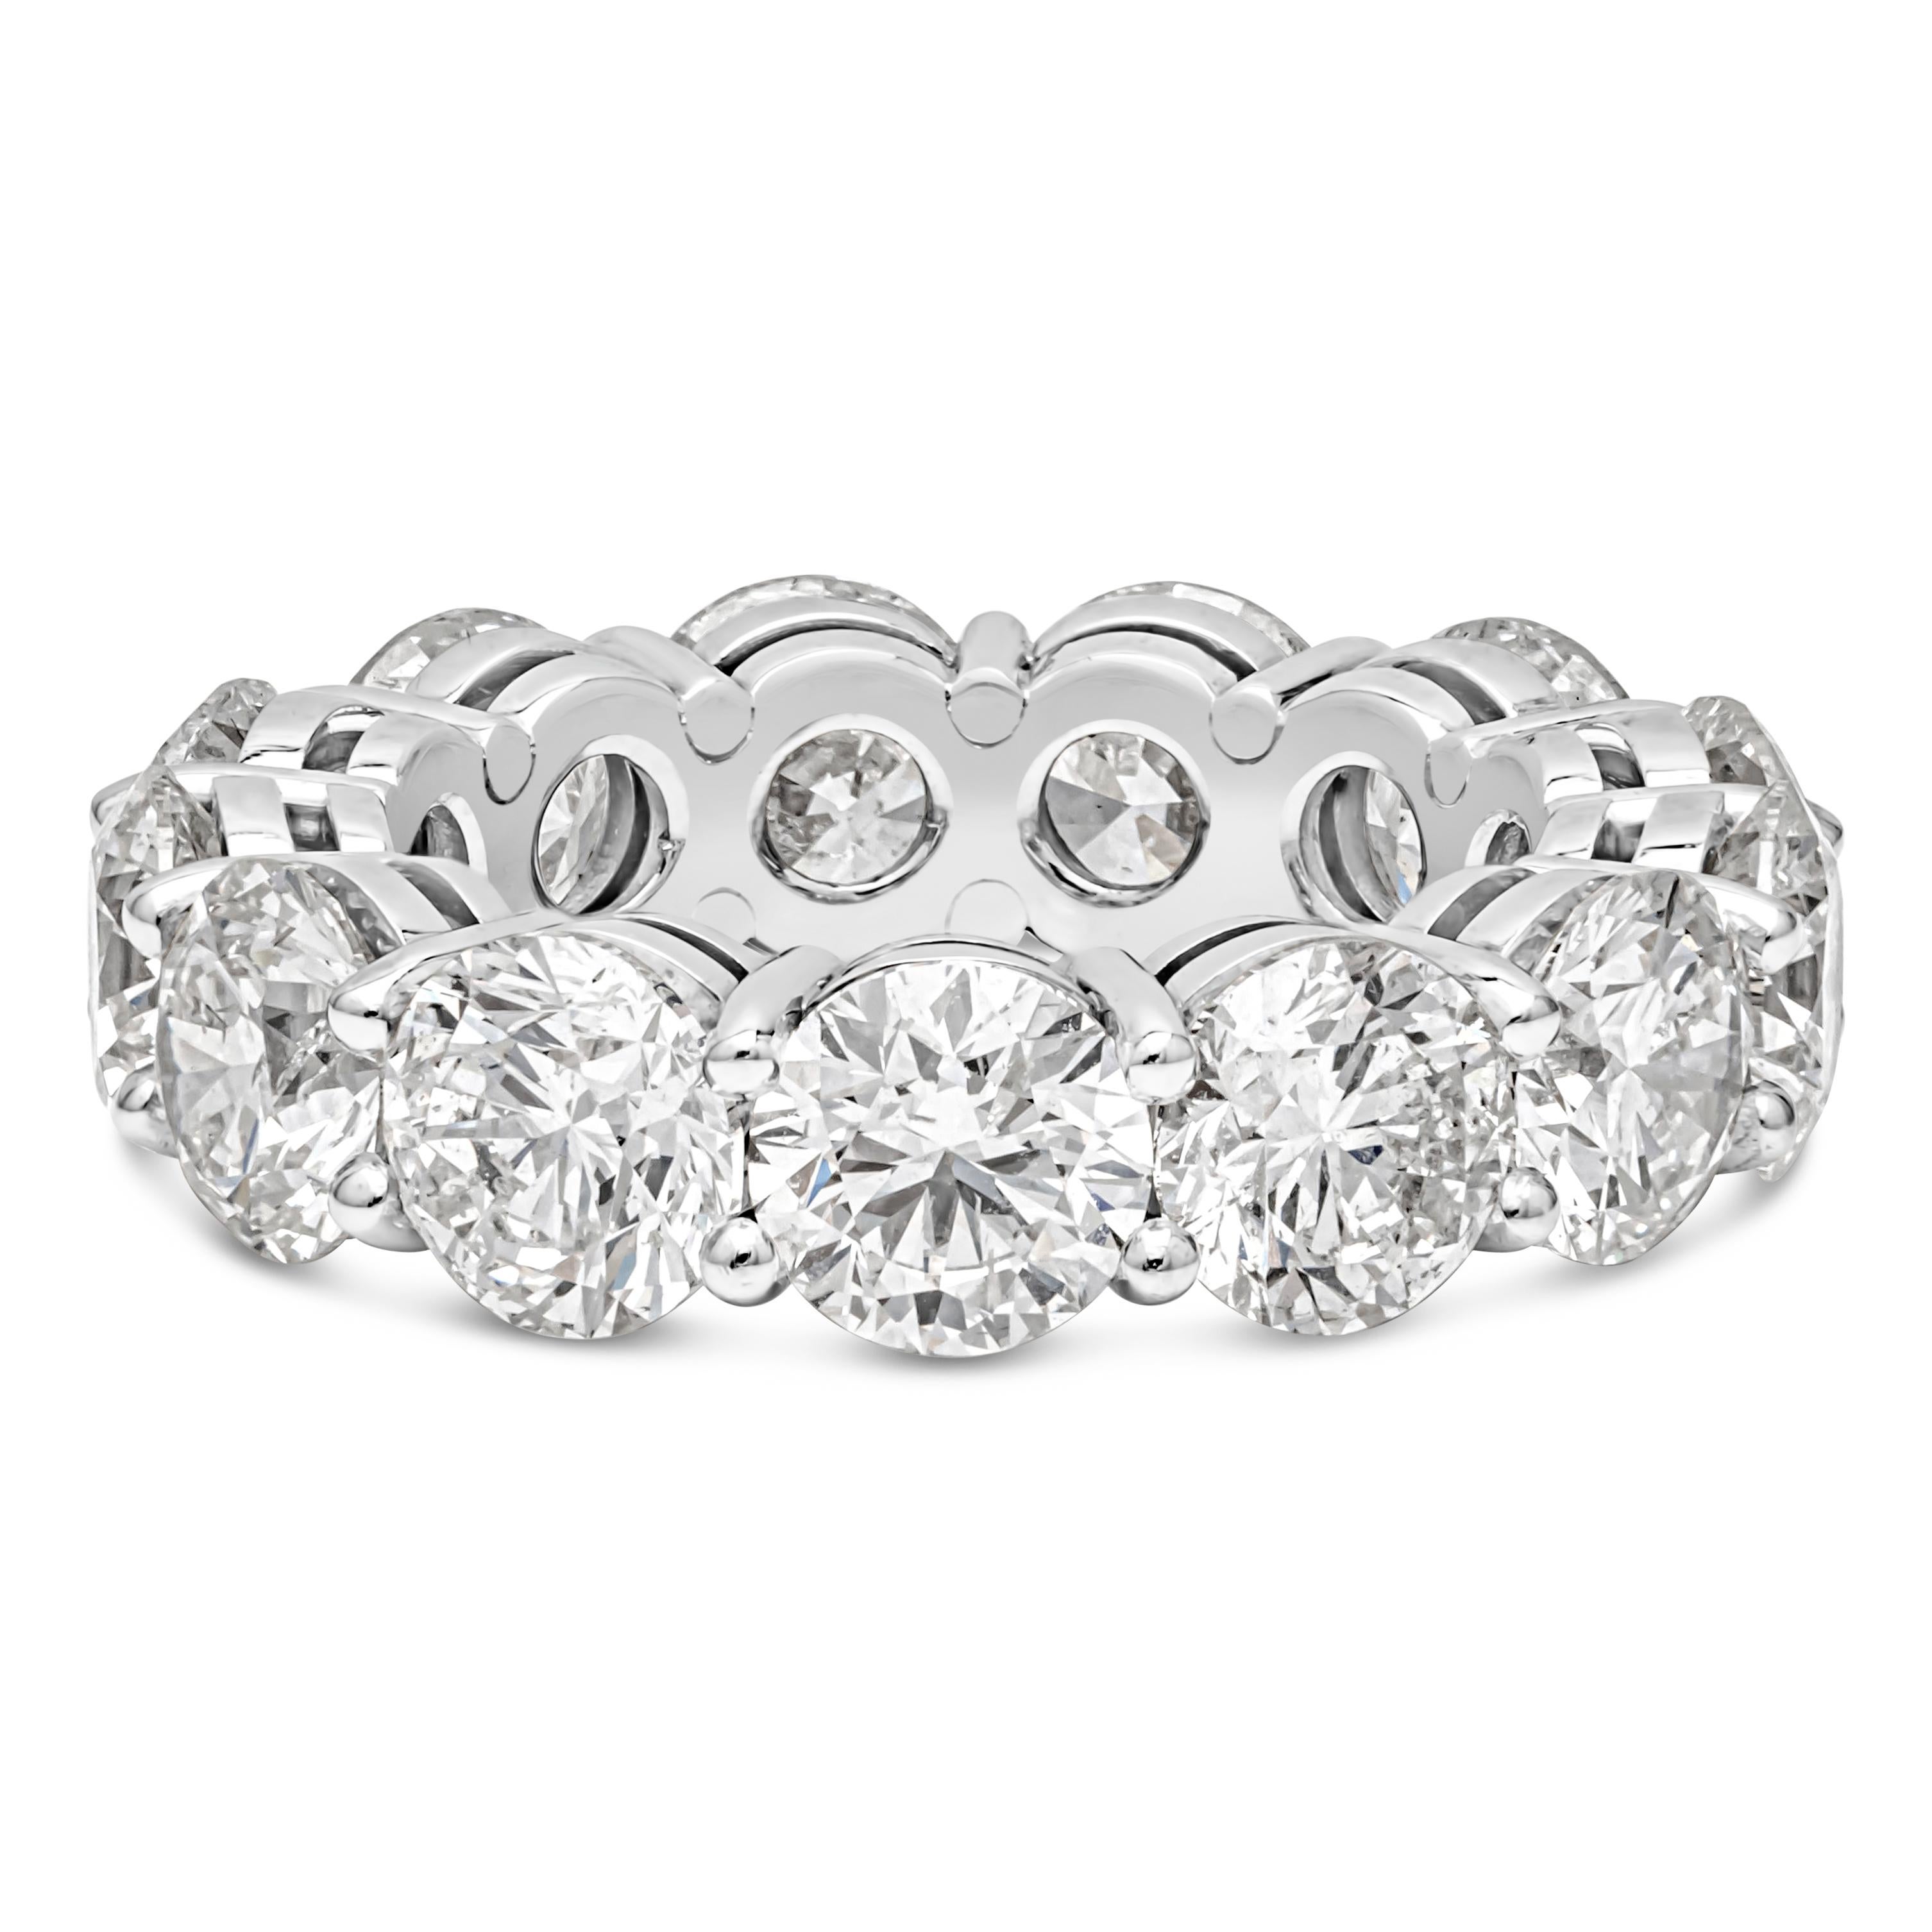 This gorgeous eternity wedding band showcasing 13 round brilliant diamonds weighing 9.56 carats total. Each diamond is approximately G-H color and SI2 in clarity. Set in a timeless shared prong setting and made in platinum. Size 6.25 US, 0.22 inches